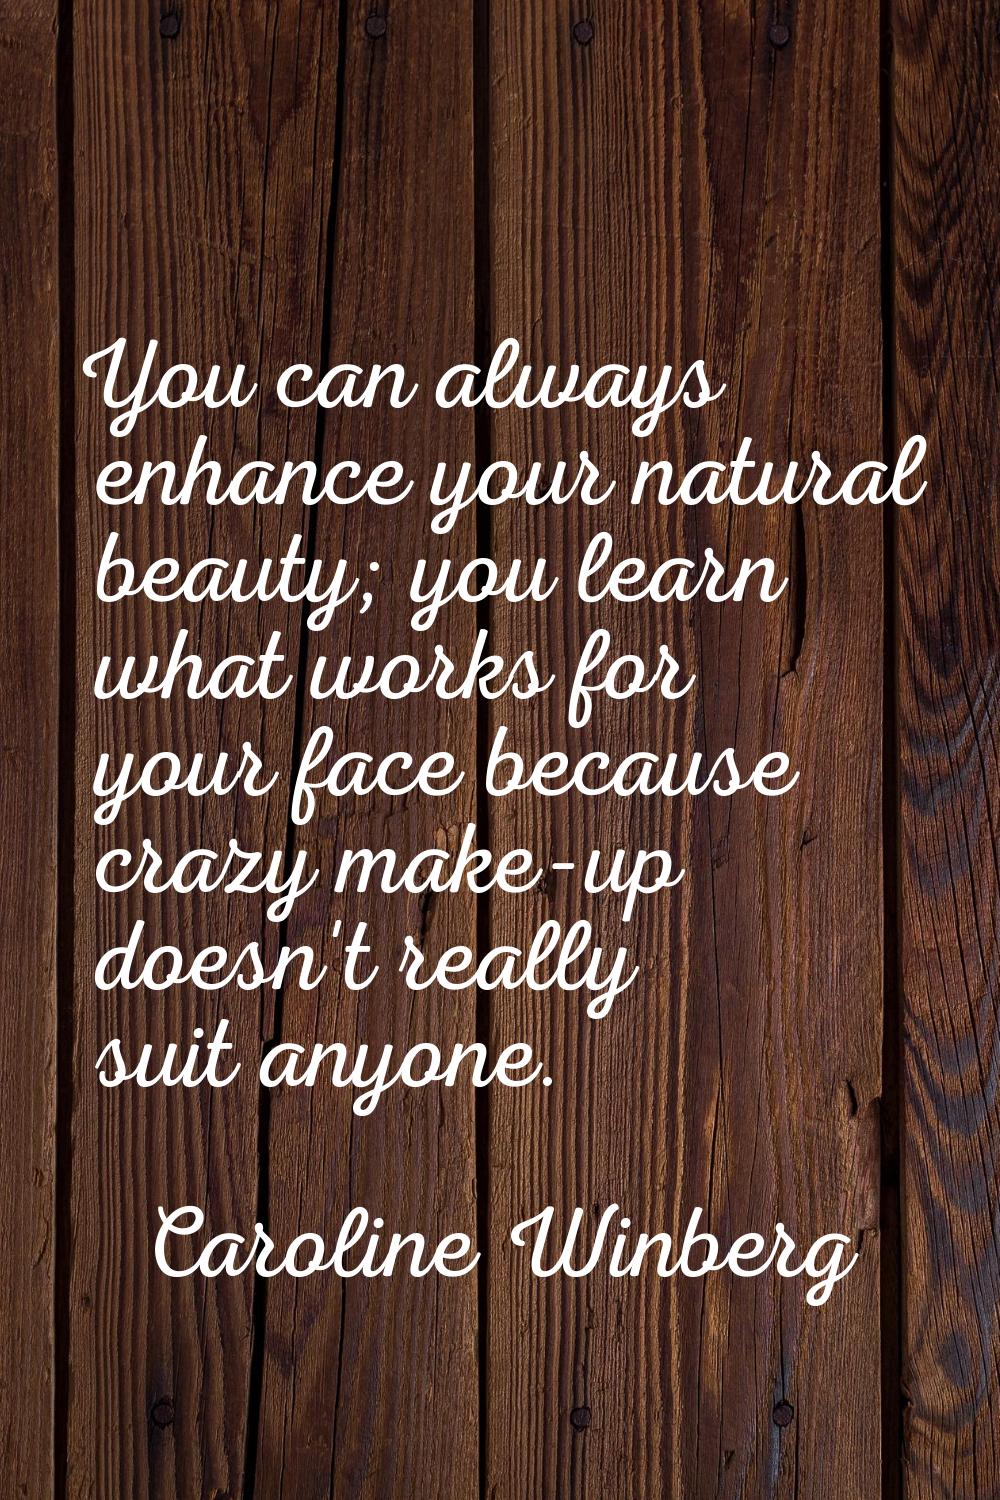 You can always enhance your natural beauty; you learn what works for your face because crazy make-u